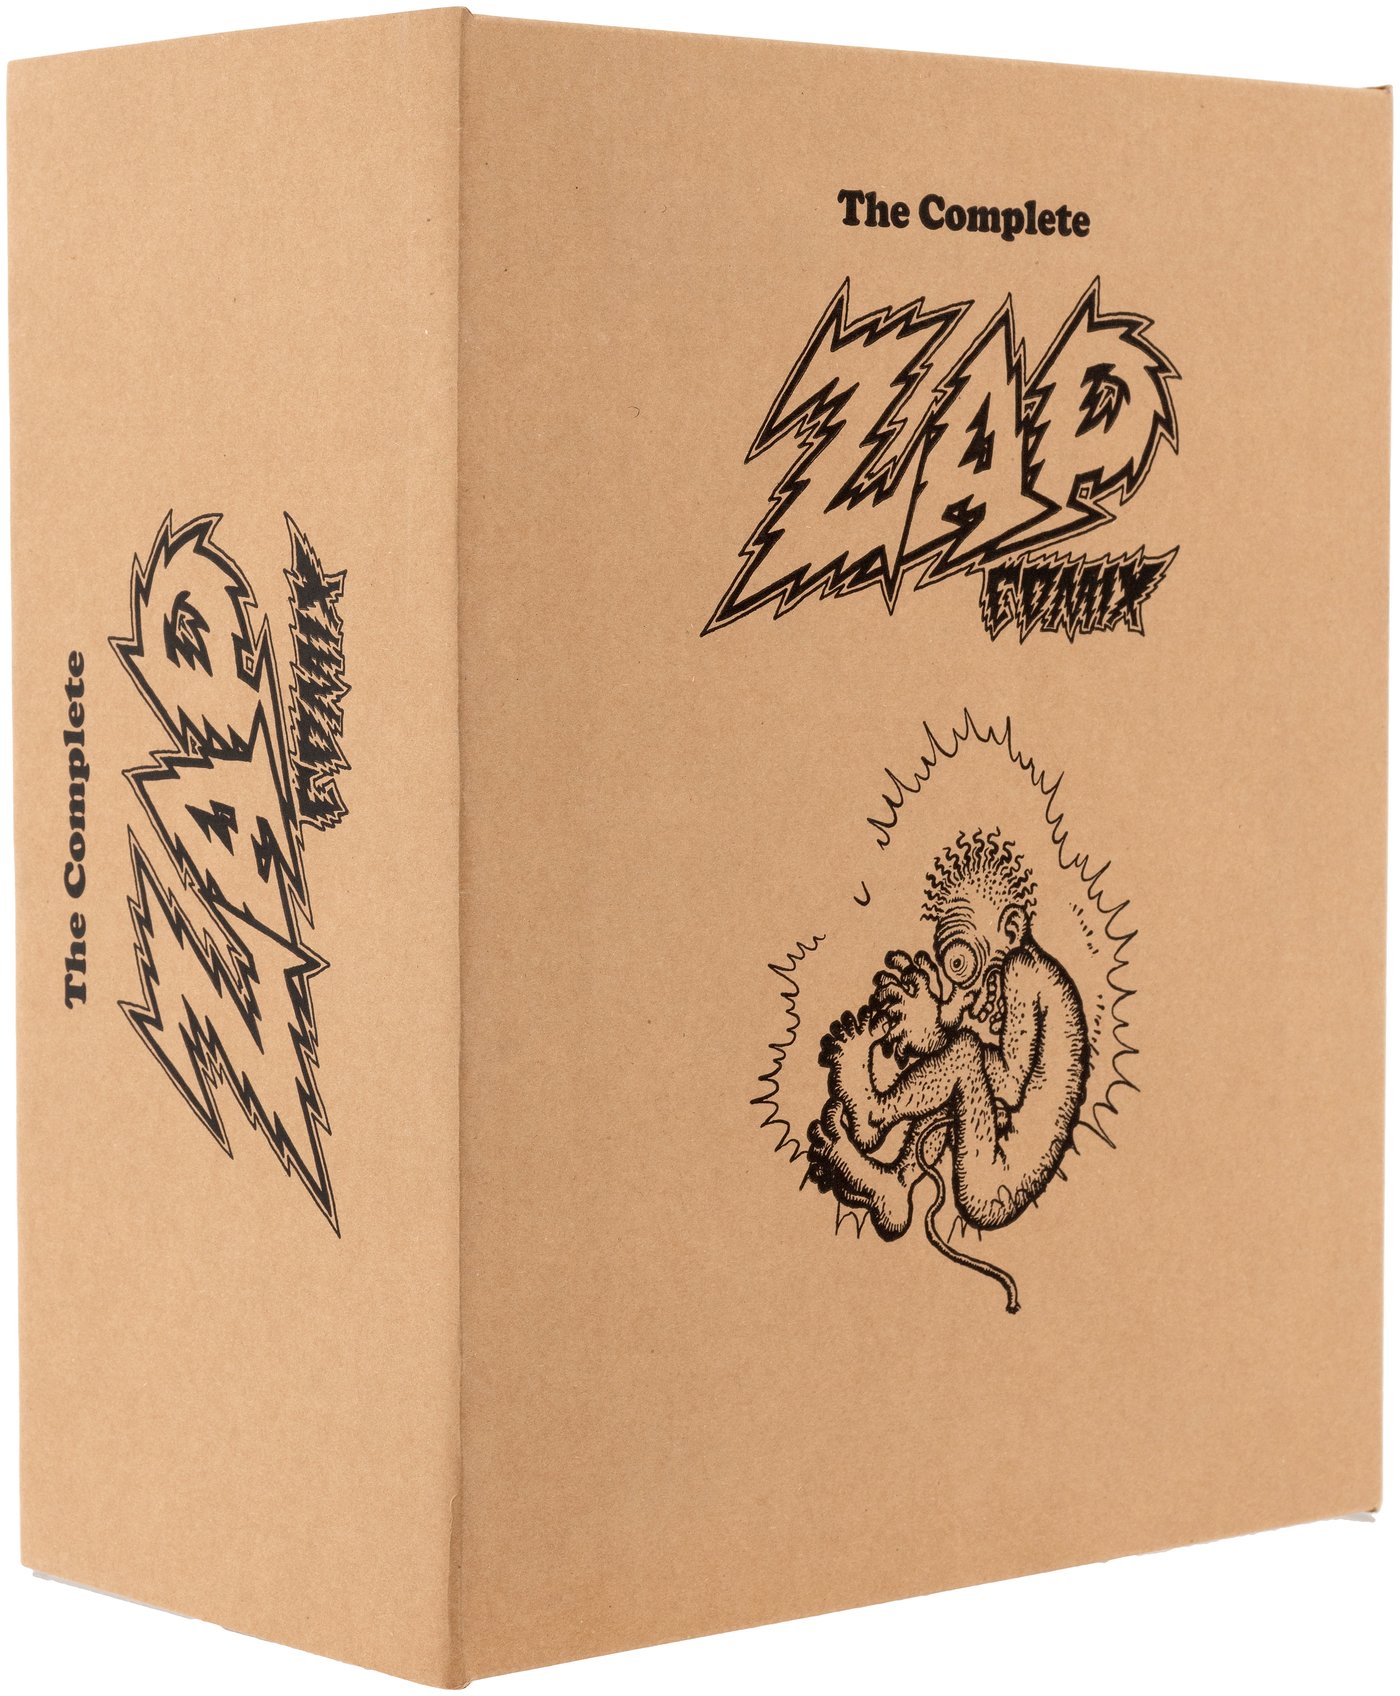 Zap Comix, Now in a Coffee Table Boxed Set - The New York Times